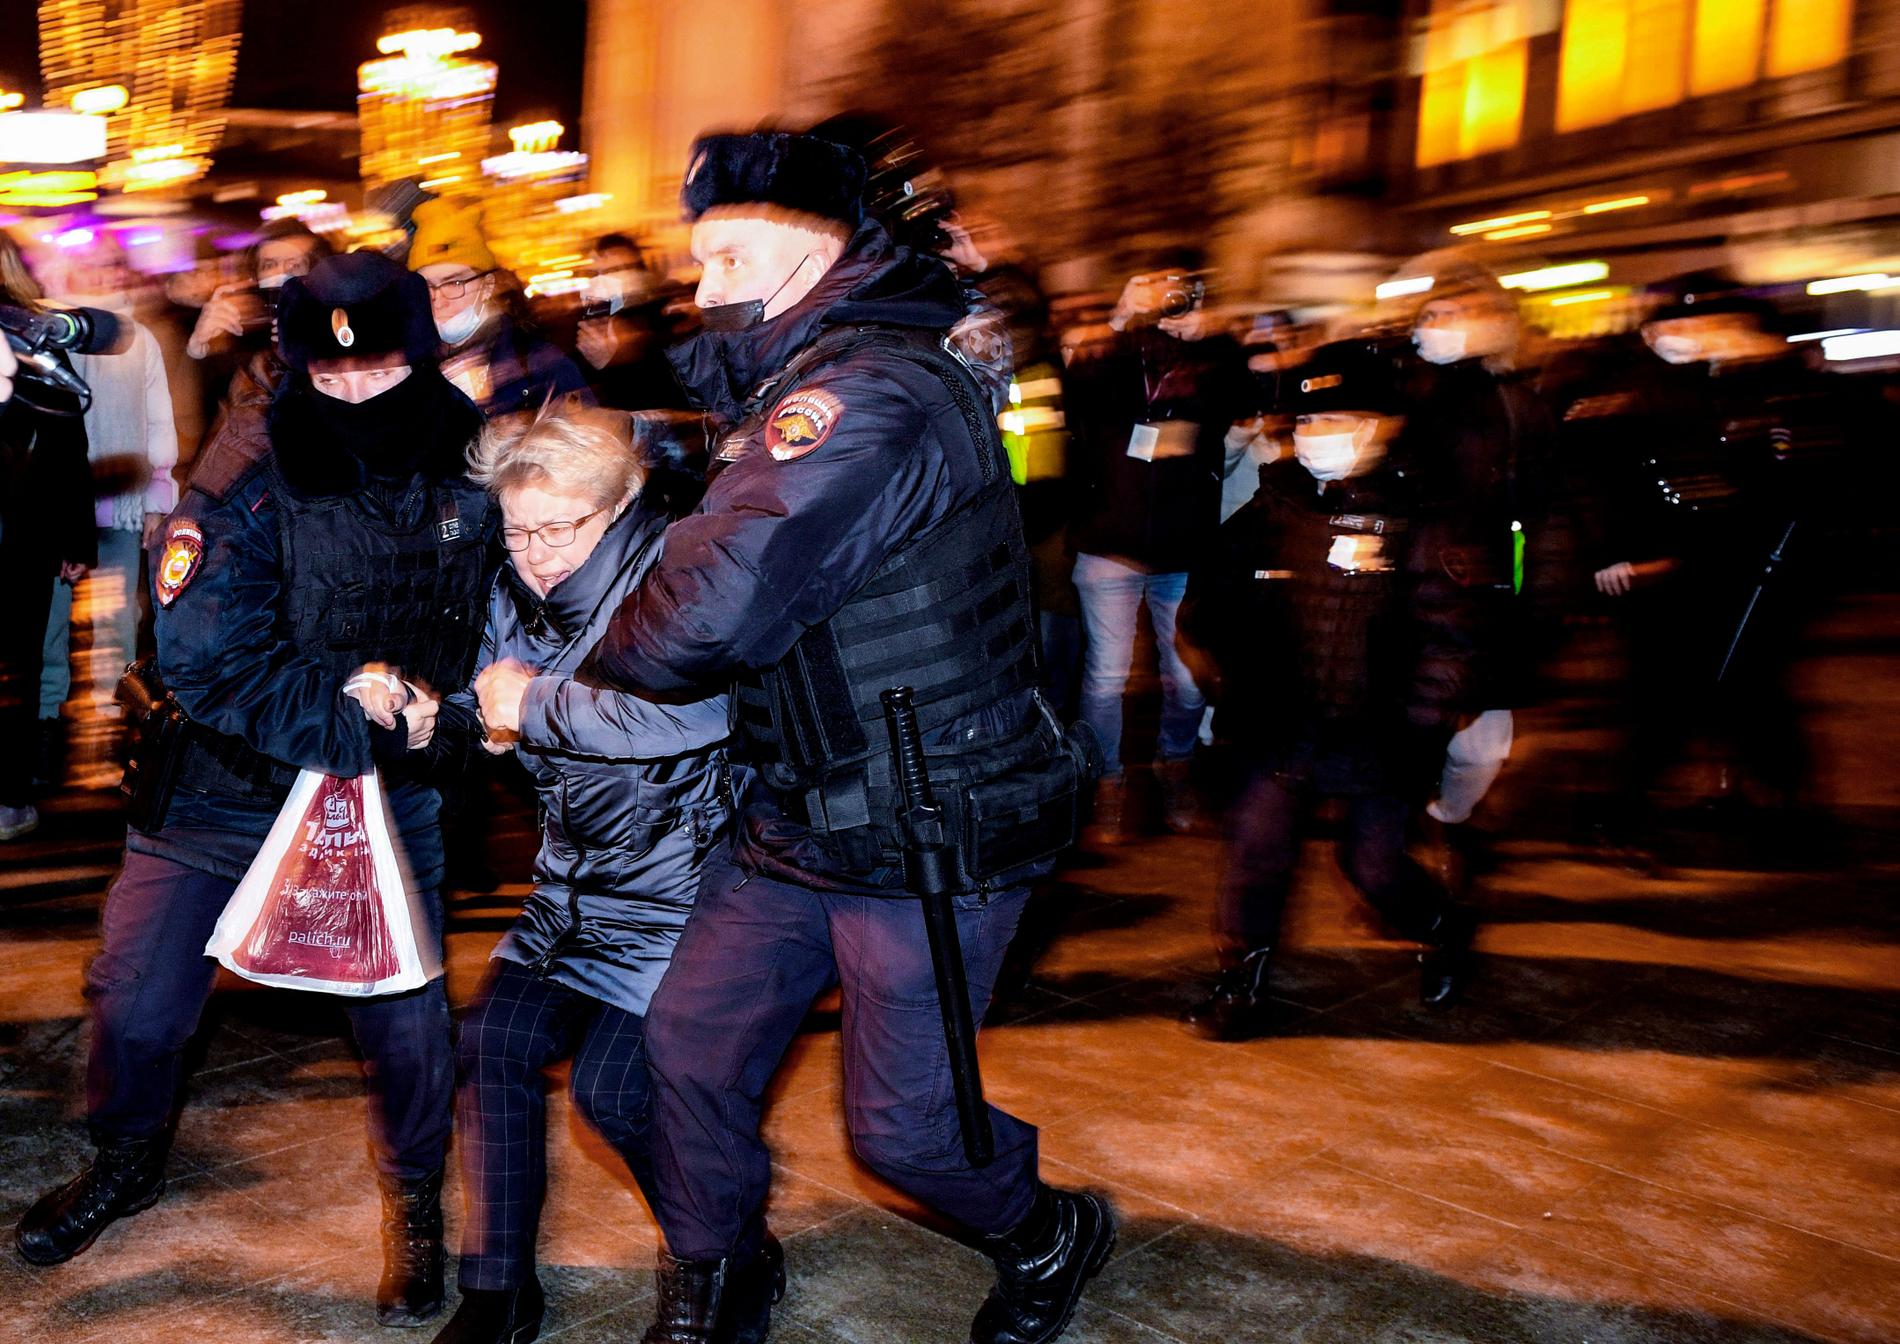 1,800 anti-war protesters arrested in Russia - VG